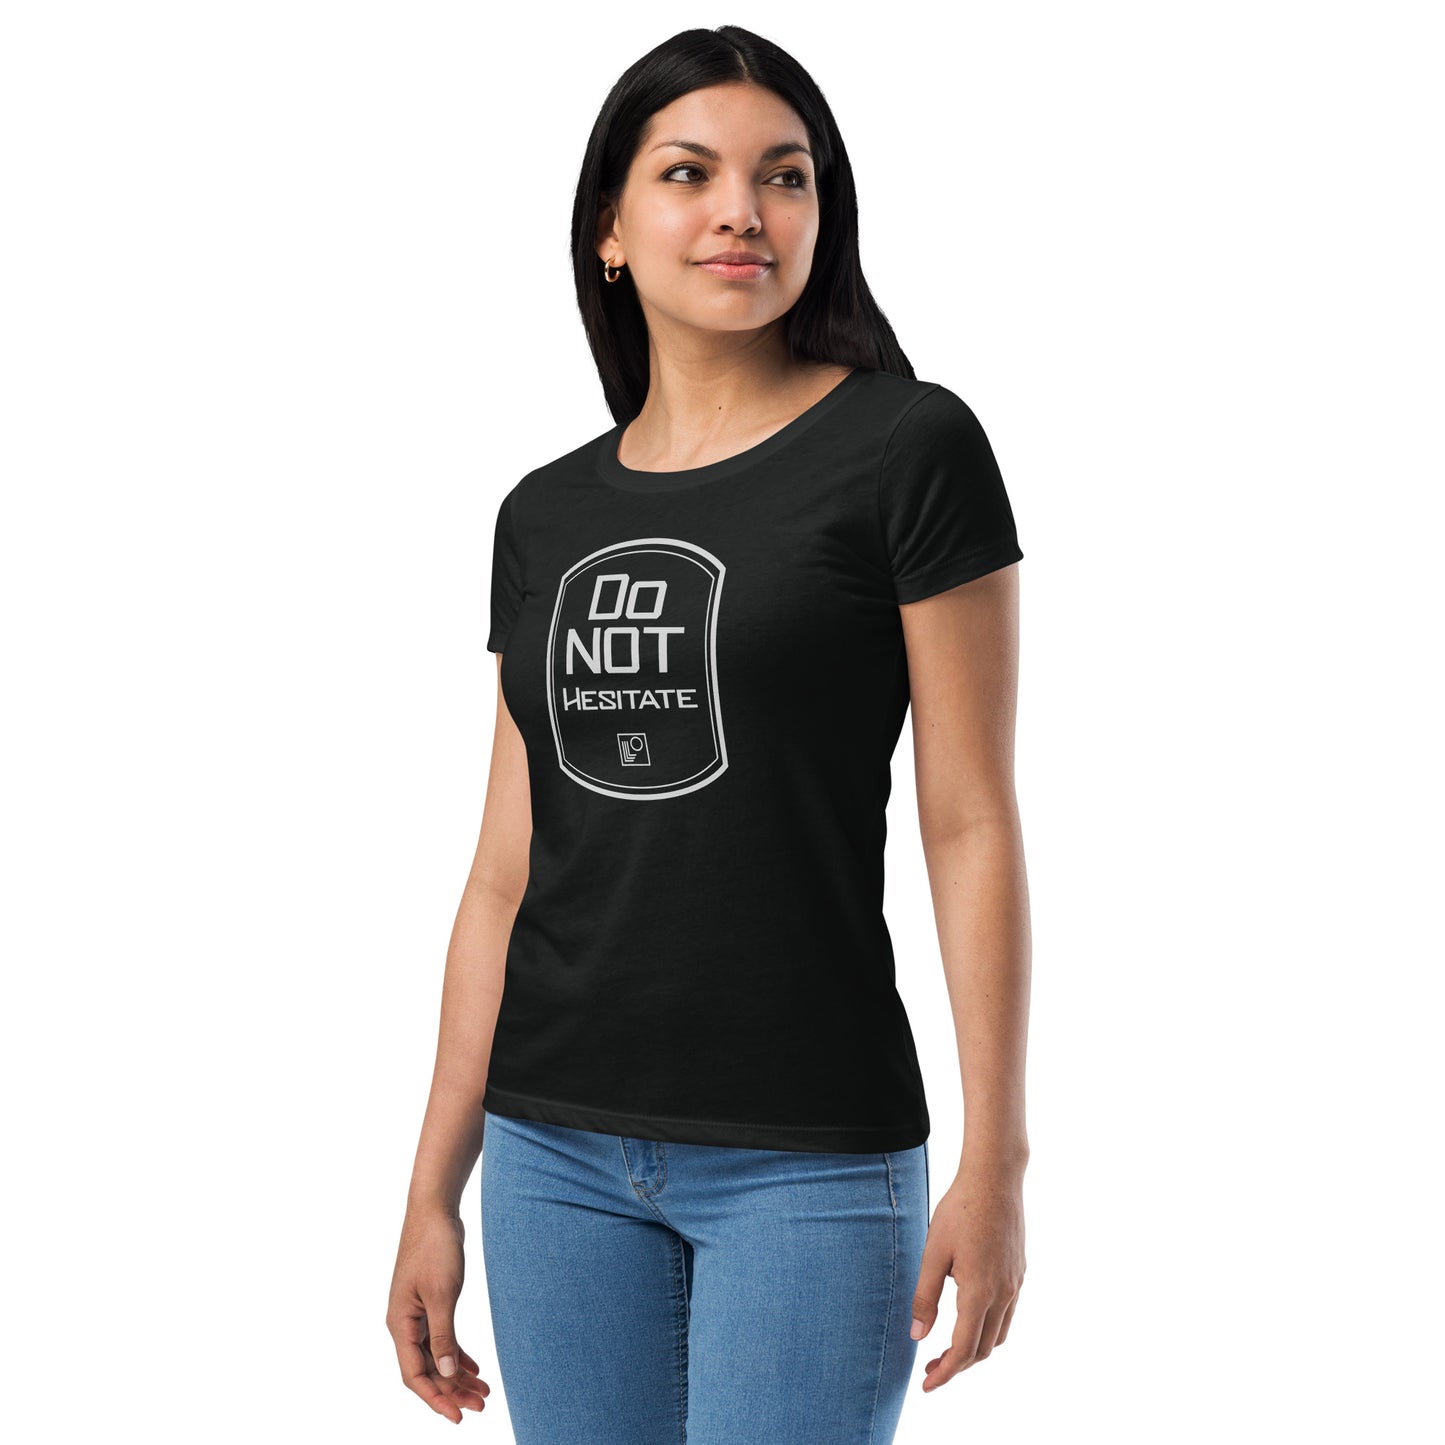 Do Not Hesitate Women’s fitted t-shirt